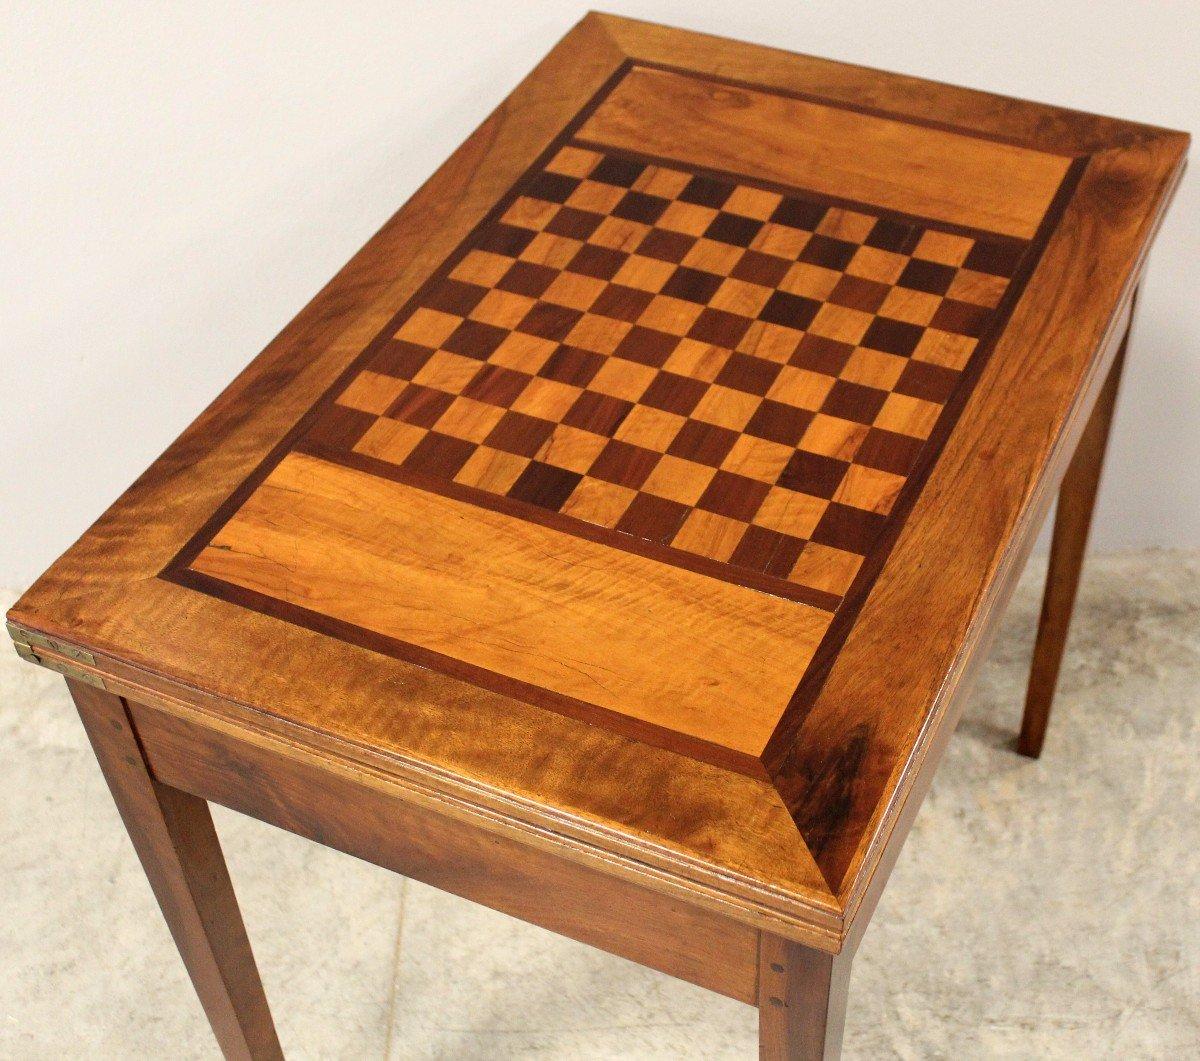 19th Century Italian Walnut and Mahogany Game Table with Checkerboard Marquetry In Good Condition For Sale In Atlanta, GA